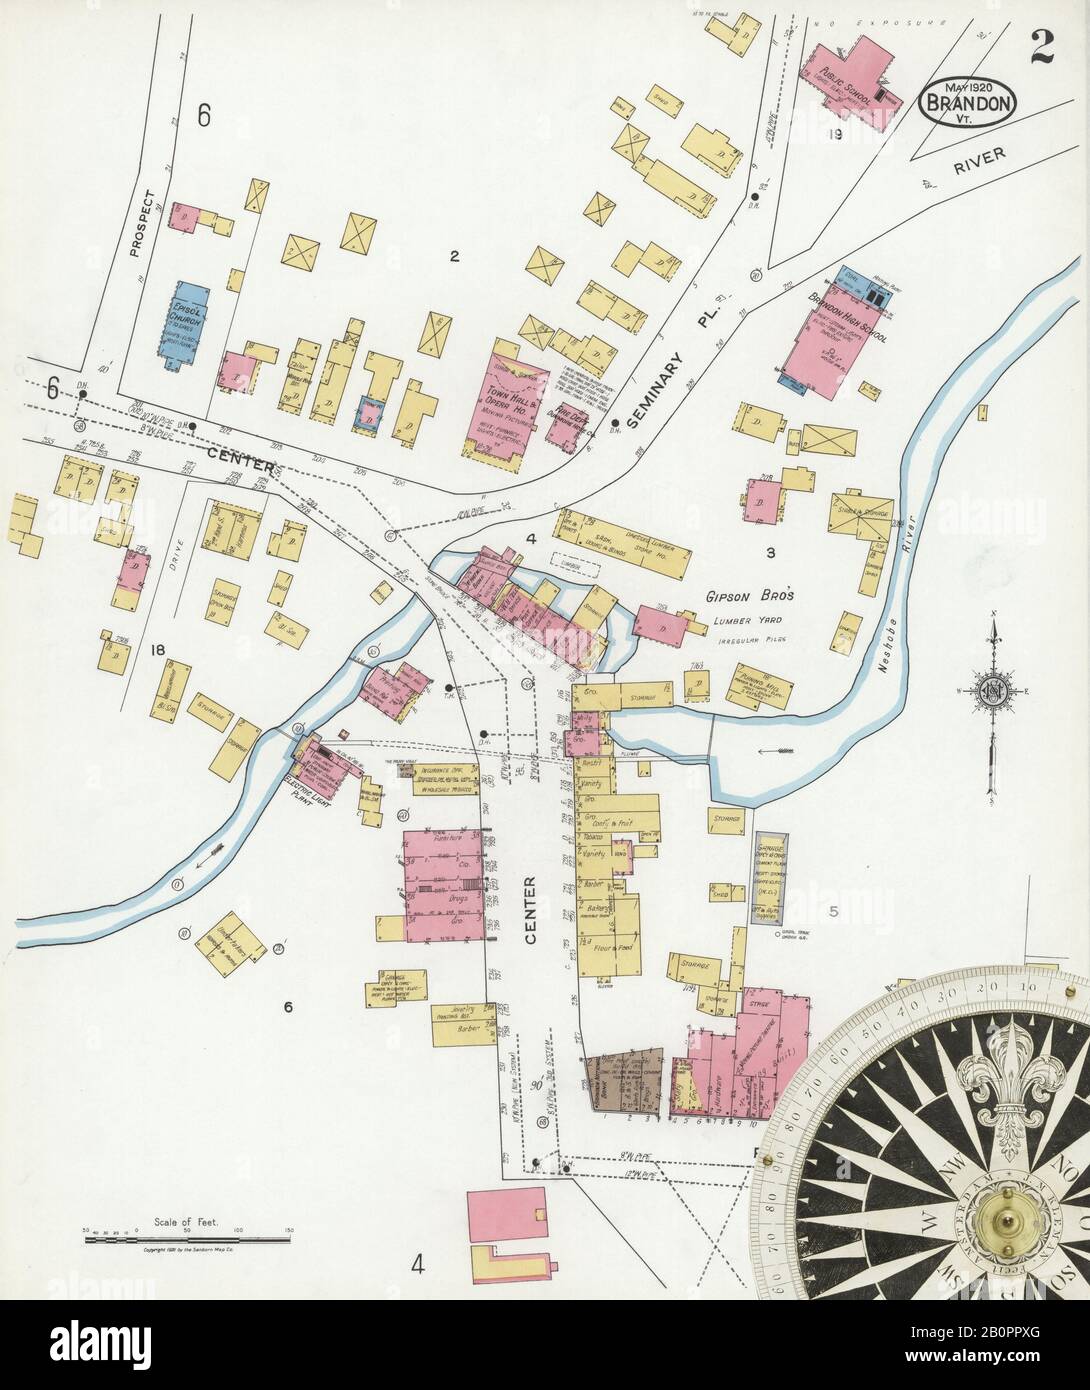 Image 2 of Sanborn Fire Insurance Map from Brandon, Rutland County, Vermont. May 1920. 7 Sheet(s), America, street map with a Nineteenth Century compass Stock Photo